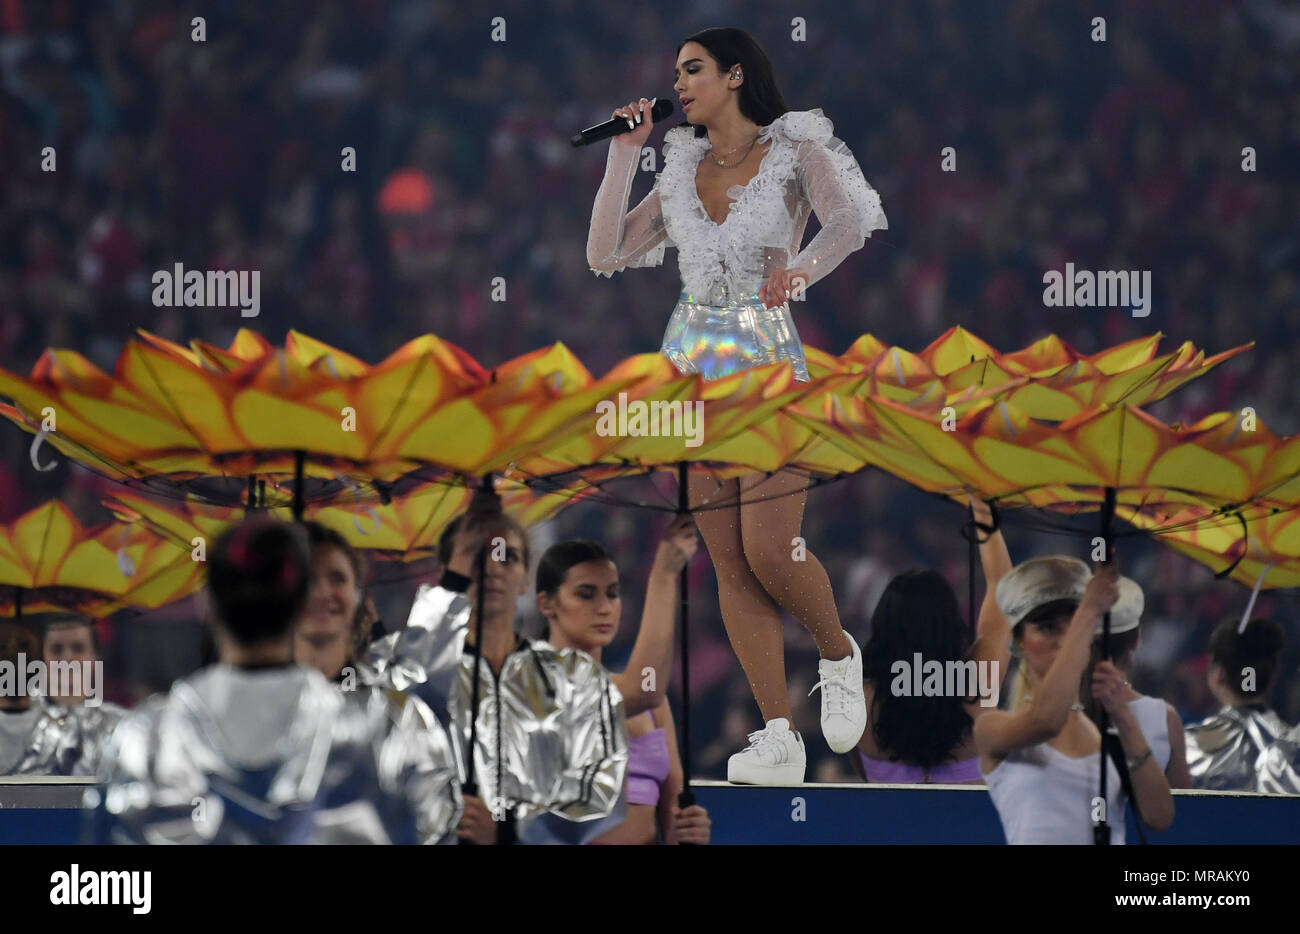 Kiev, Ukraine, 26 May 2018, soccer, Champions League, Real Madrid vs FC  Liverpool, finals at the Olimpiyskiy National Sports Complex. The British  singer Dua Lipa performing before the match. Photo: Ina Fassbender/dpa